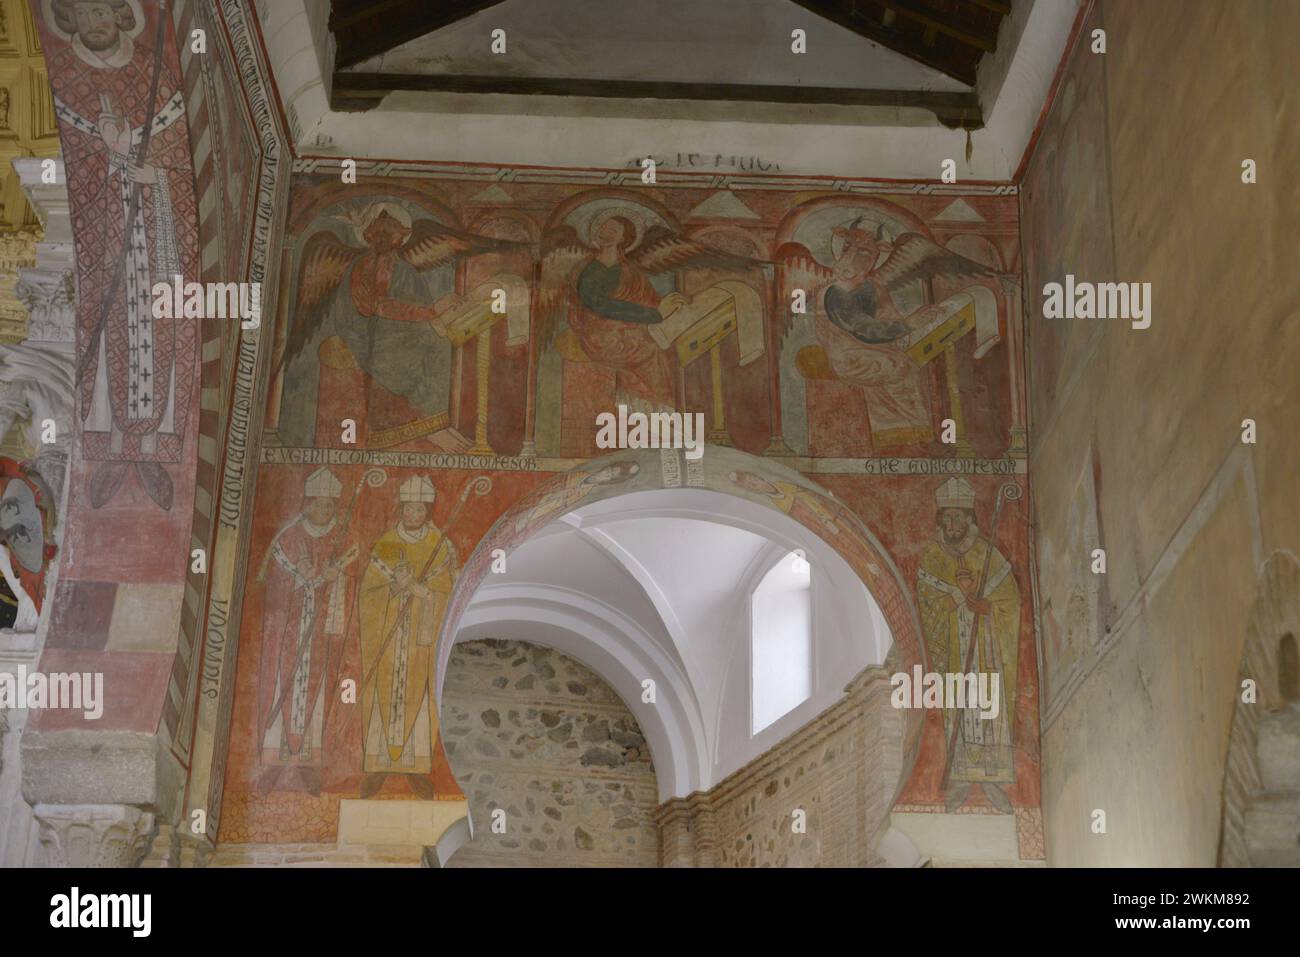 Spain, Toledo. Church of San Román. Built in Mudejar style in the 13th century. Paintings on the eastern front of the Nave of the Epistle. In the upper part: Saint Matthew, Saint Mark and Saint Luke, three of the evangelists. They are depicted winged and with their faces changed by their zoomorphic symbol, as they write the Gospels. In the lower part, three Confessors of the Catholic Church: Saint Eugene, Saint Isidore and Saint Gregory. Stock Photo